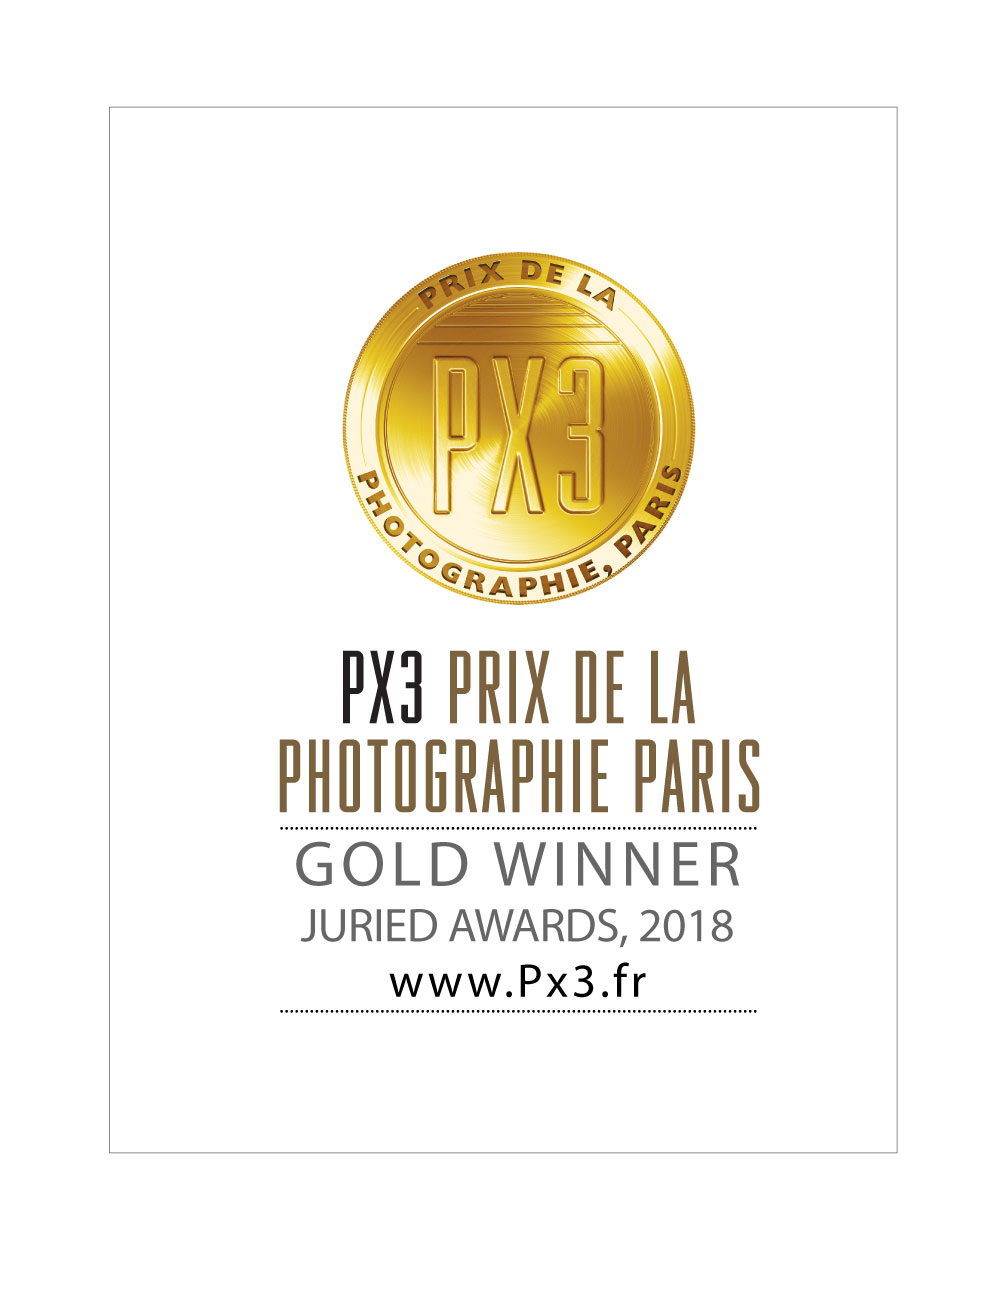 INNER OF PX3, Prix de la Photographie Paris

Harald Weimann of Germany was awarded Gold in the PX3 2018 Competition. 

Harald Weimann of Germany was Awarded: Gold in category Fine Art for the entry entitled, 